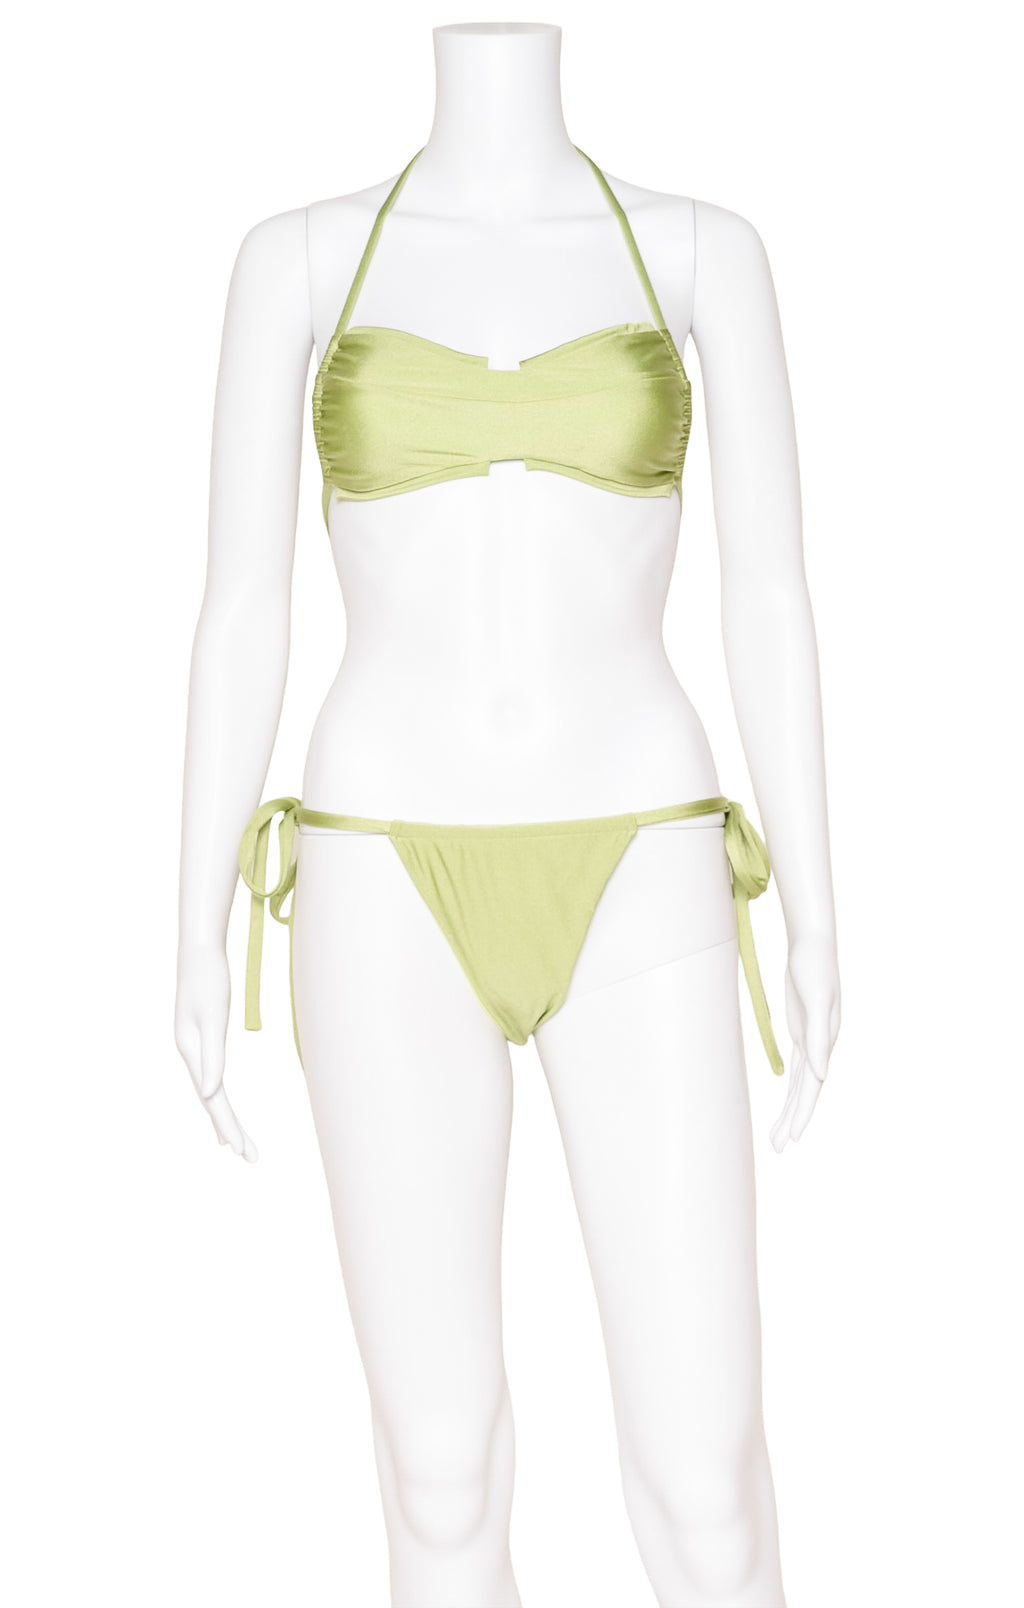 FAE (NEW) with tags Bikini Size: Top - S Bottoms - M